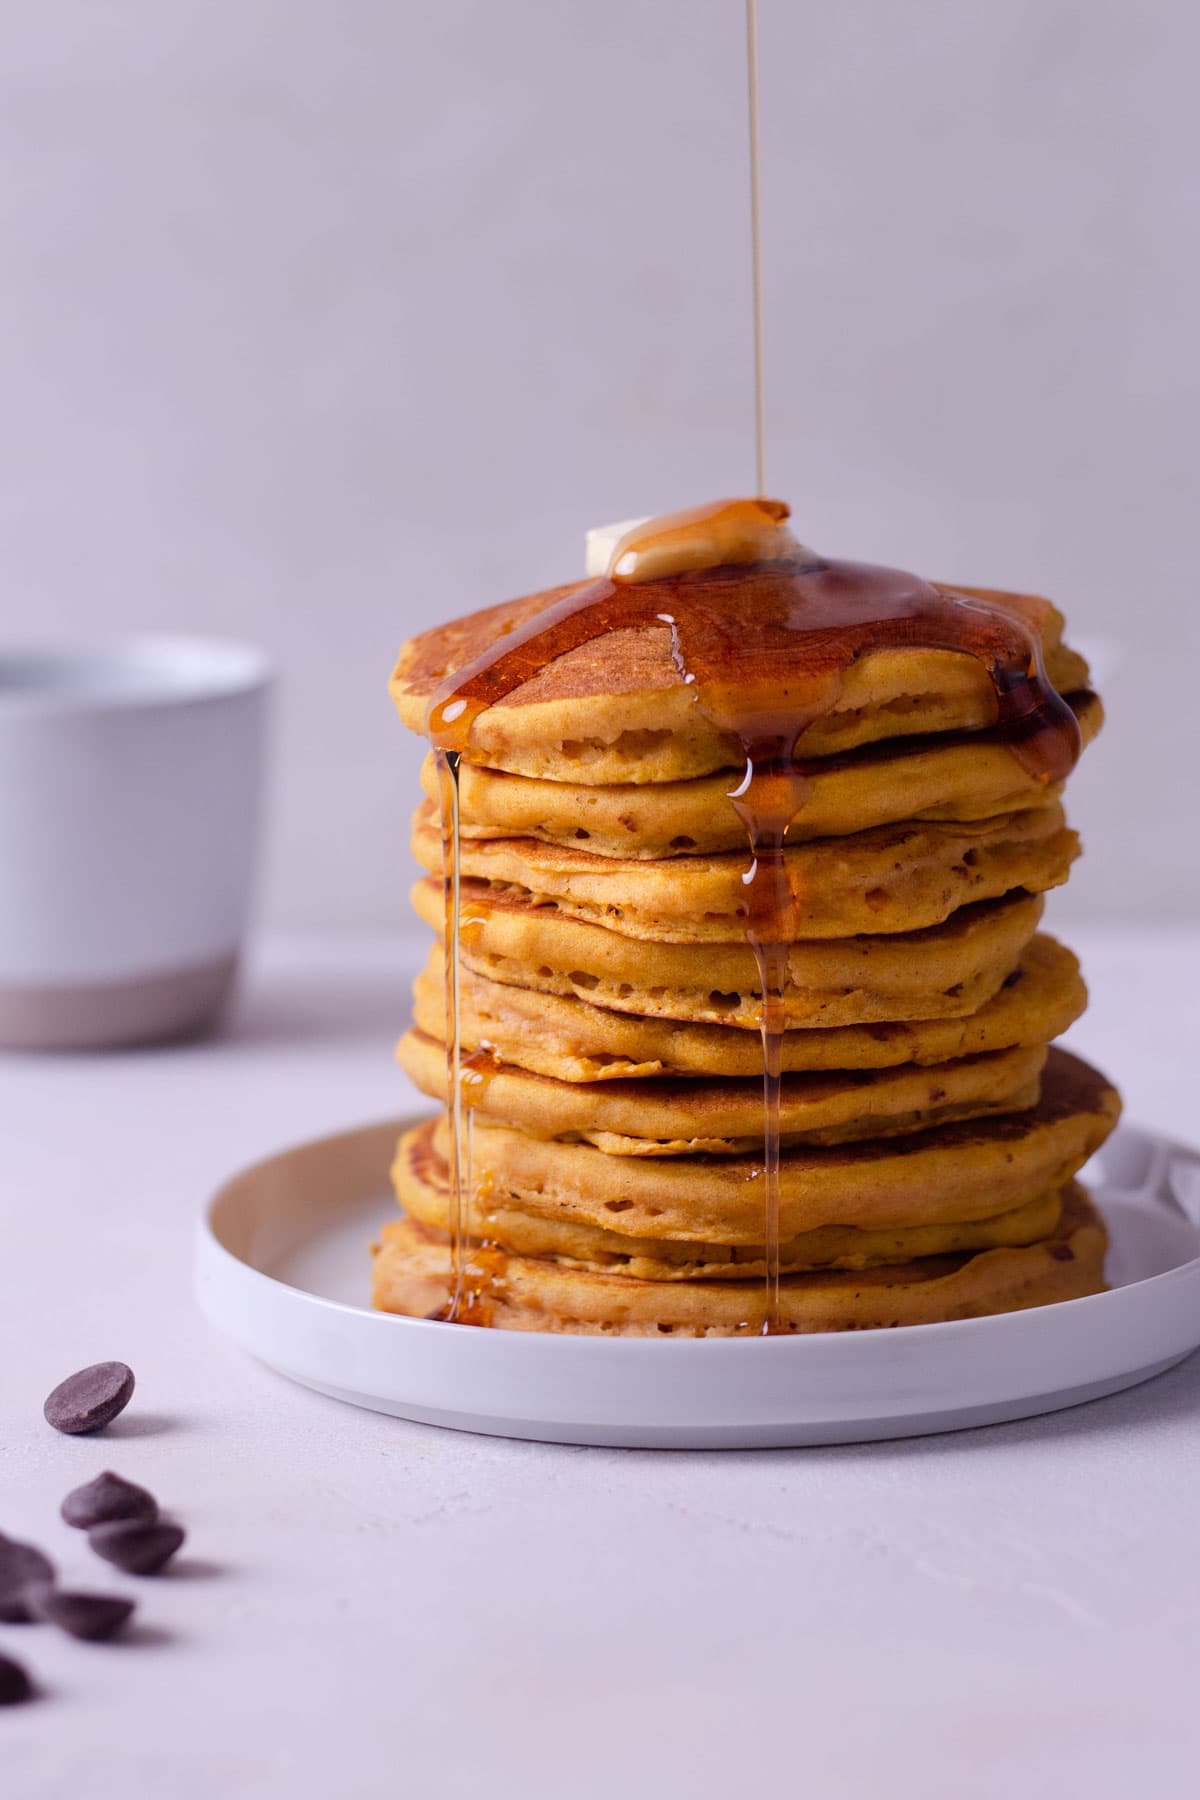 Straight on shot of a high stack of pumpkin chocolate chip pancakes with butter on top and maple syrup dripping down, with a coffee mug in the background.